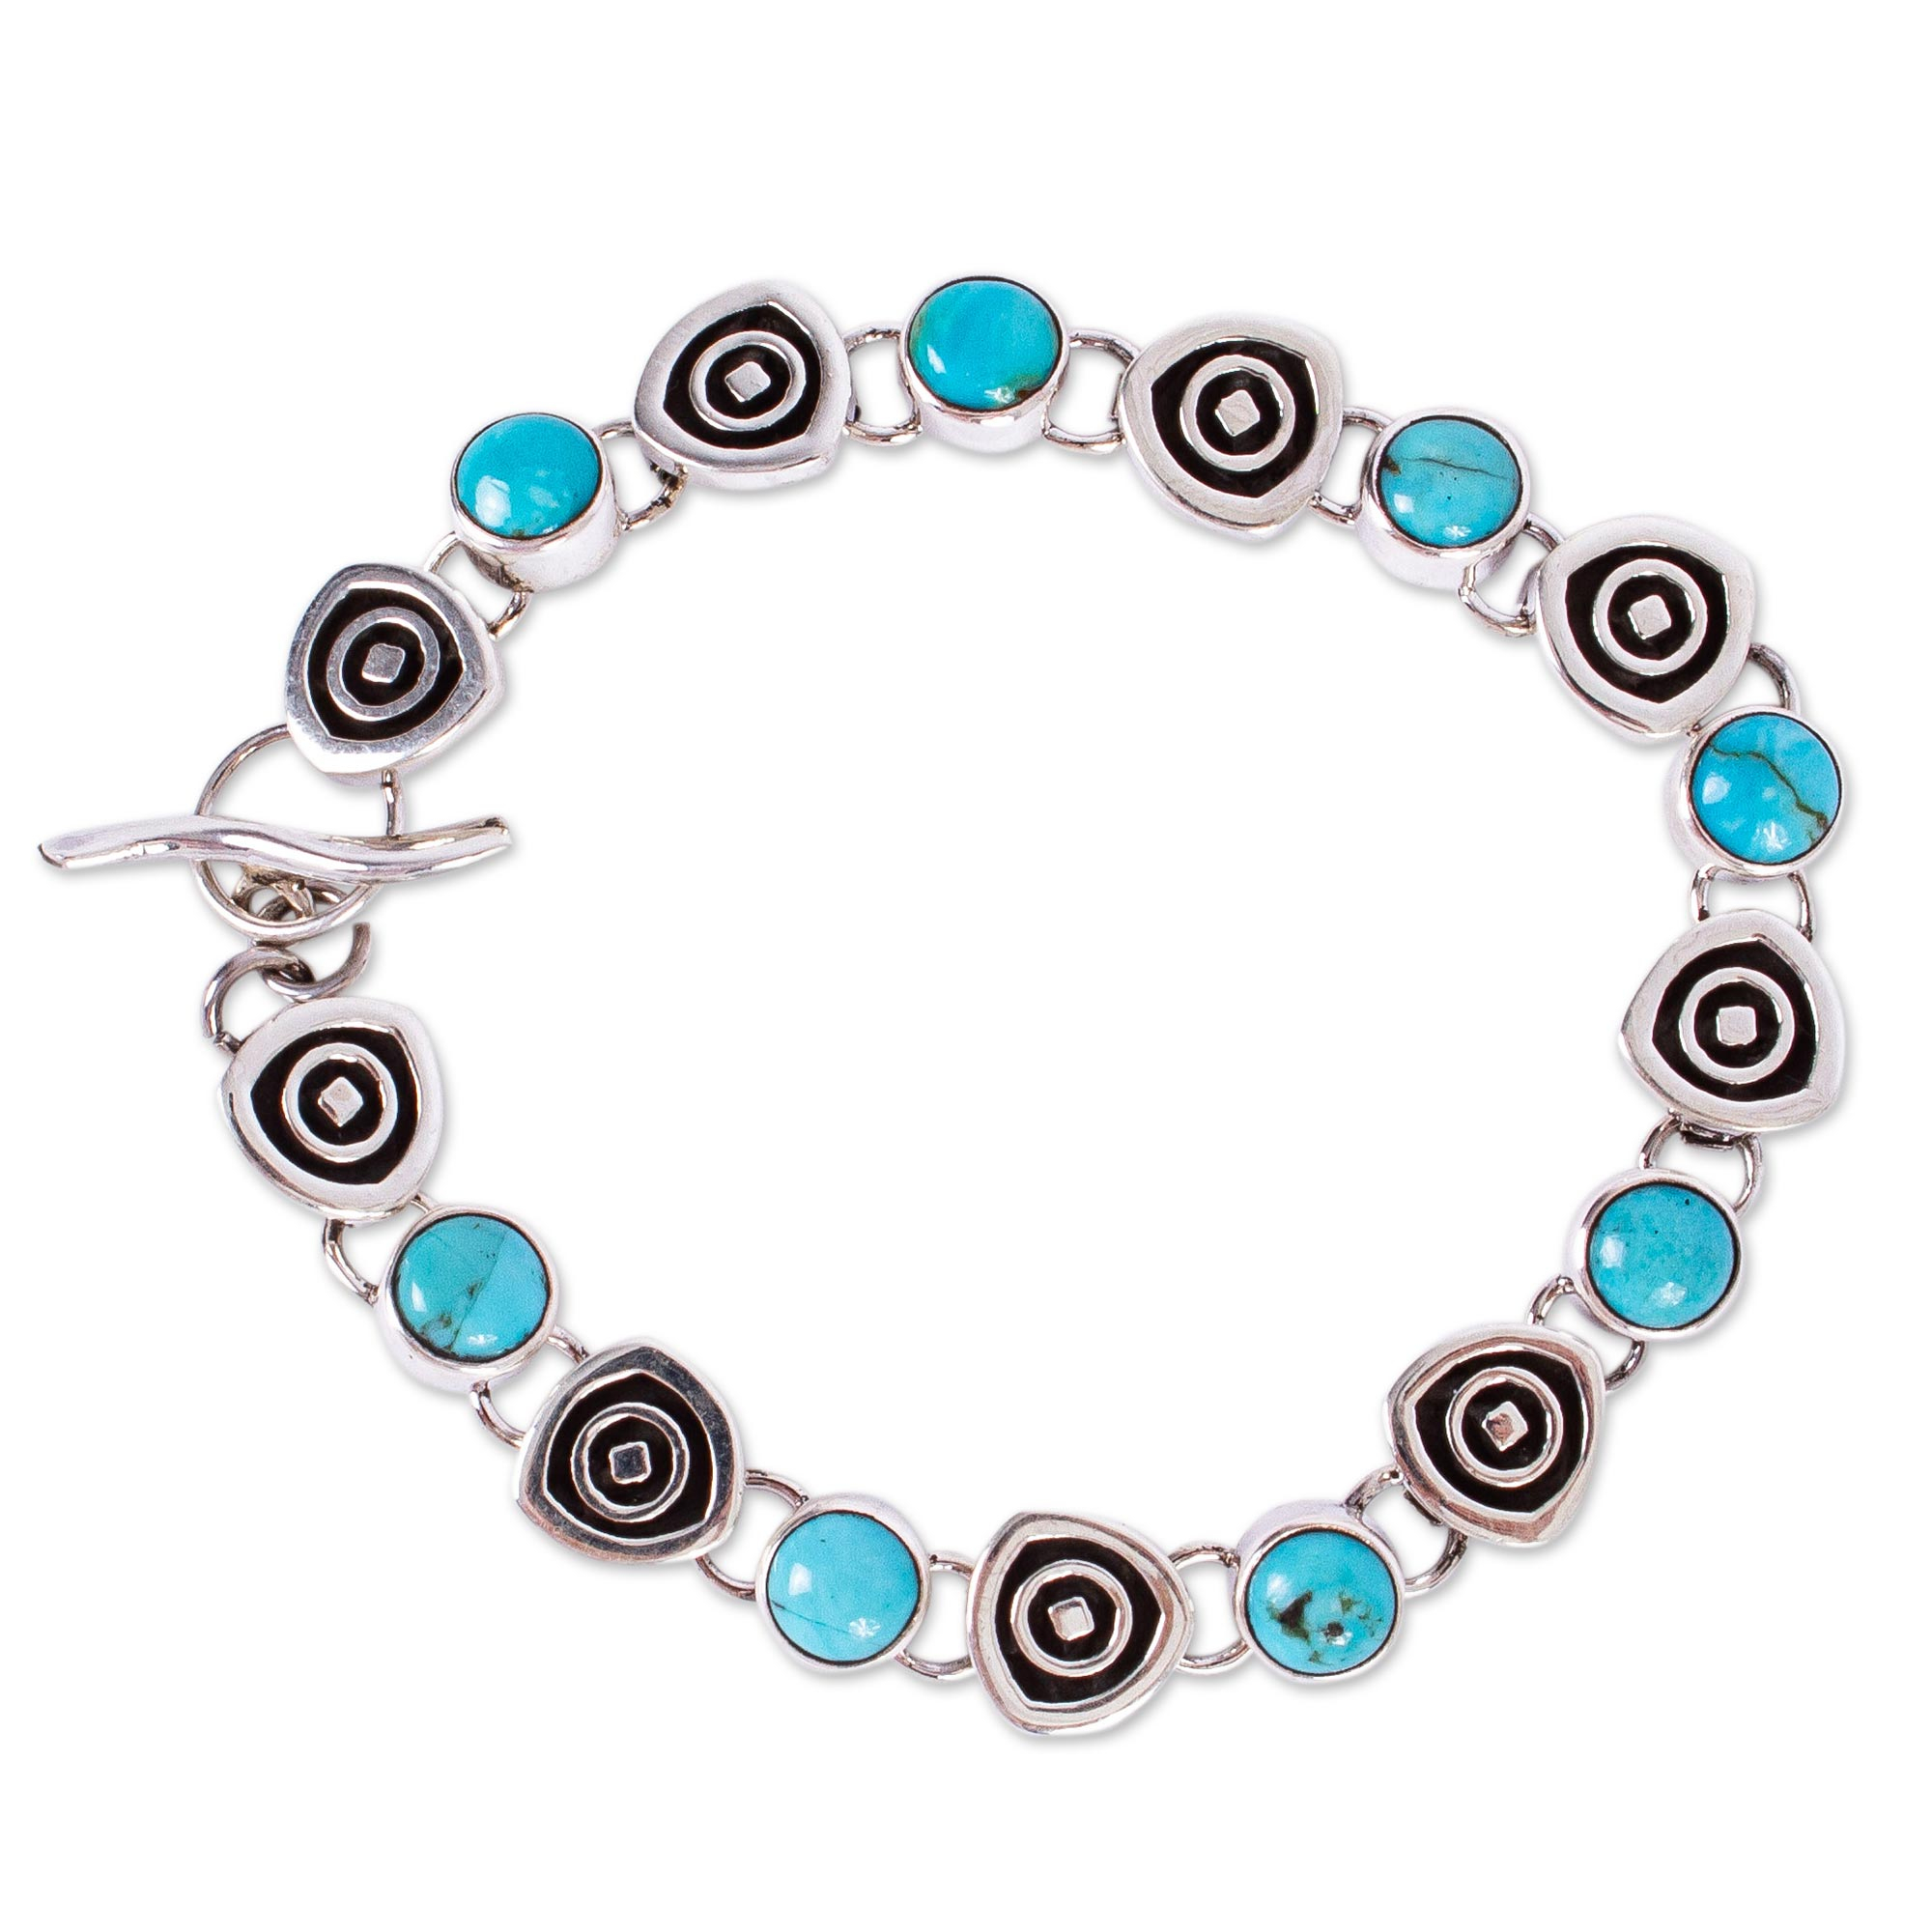 Taxco Style Turquoise Link Bracelet from Mexico - Morning Sky